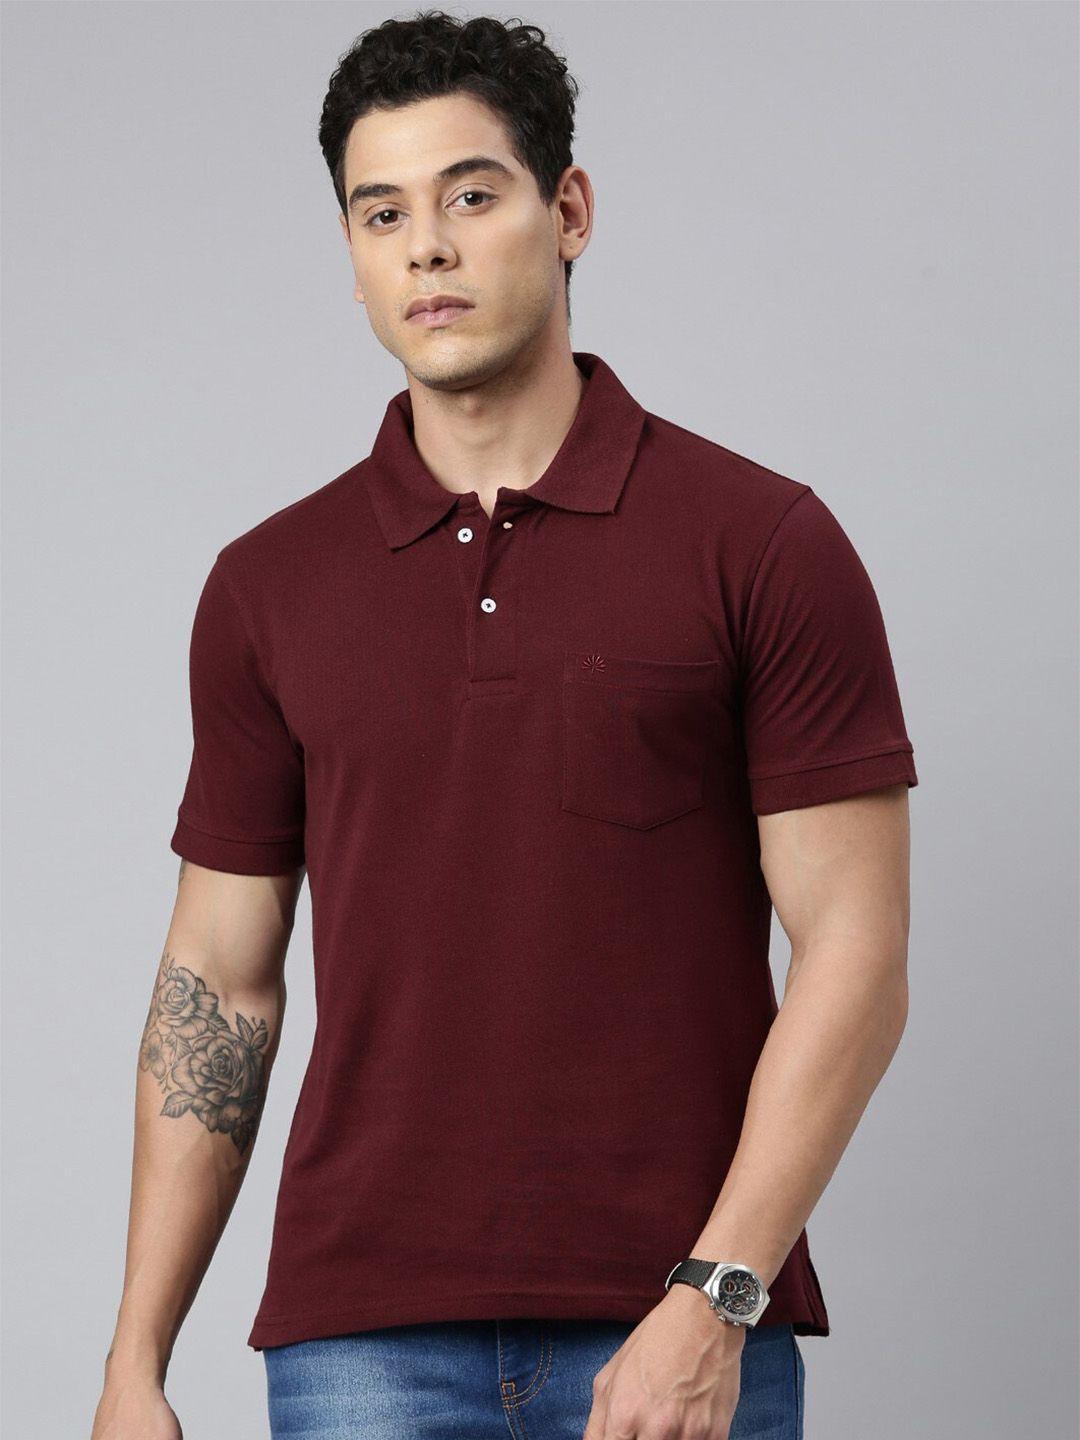 chennis polo collar short sleeves pure cotton slim fit t-shirt